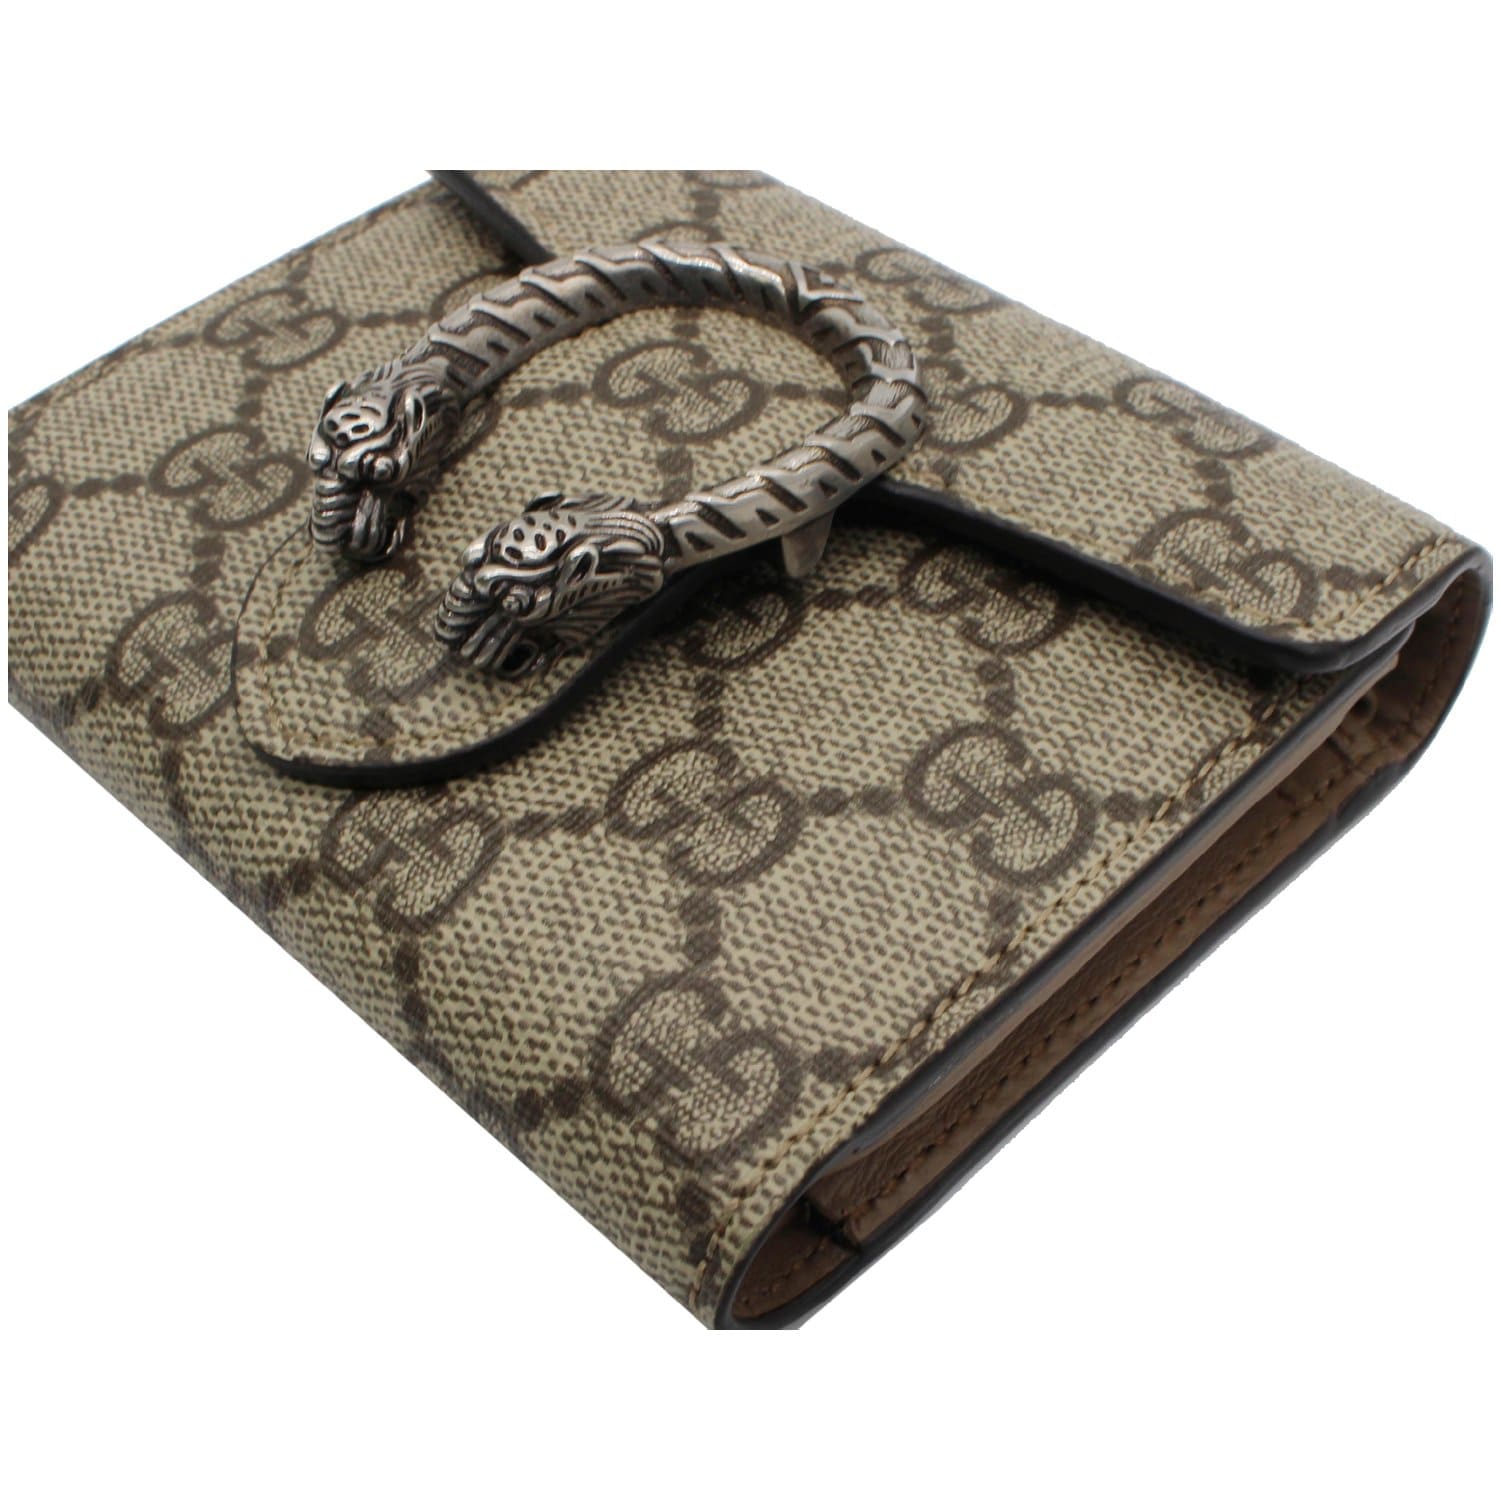 Gucci wallets & card holders for Women